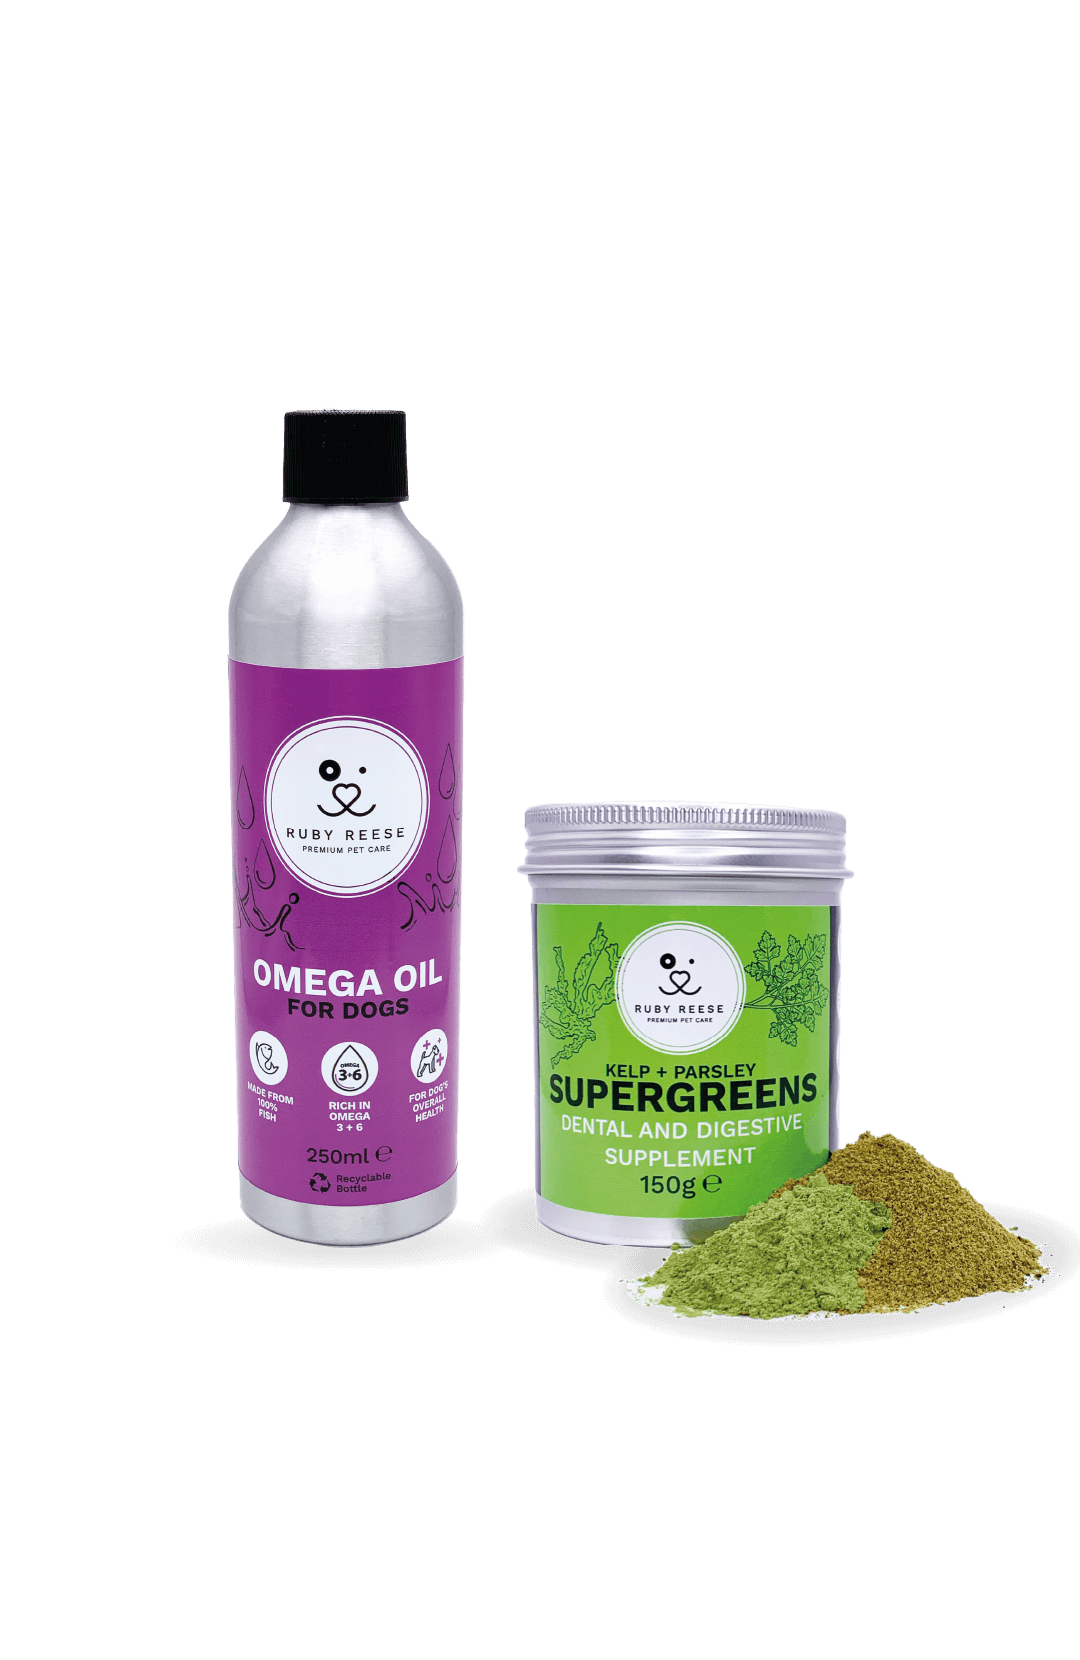 Bottle of RUBY REESE OMEGA OIL FOR DOGS standing next to RUBY REESE SUPERGREENS with some seaweed powder spilled in the front